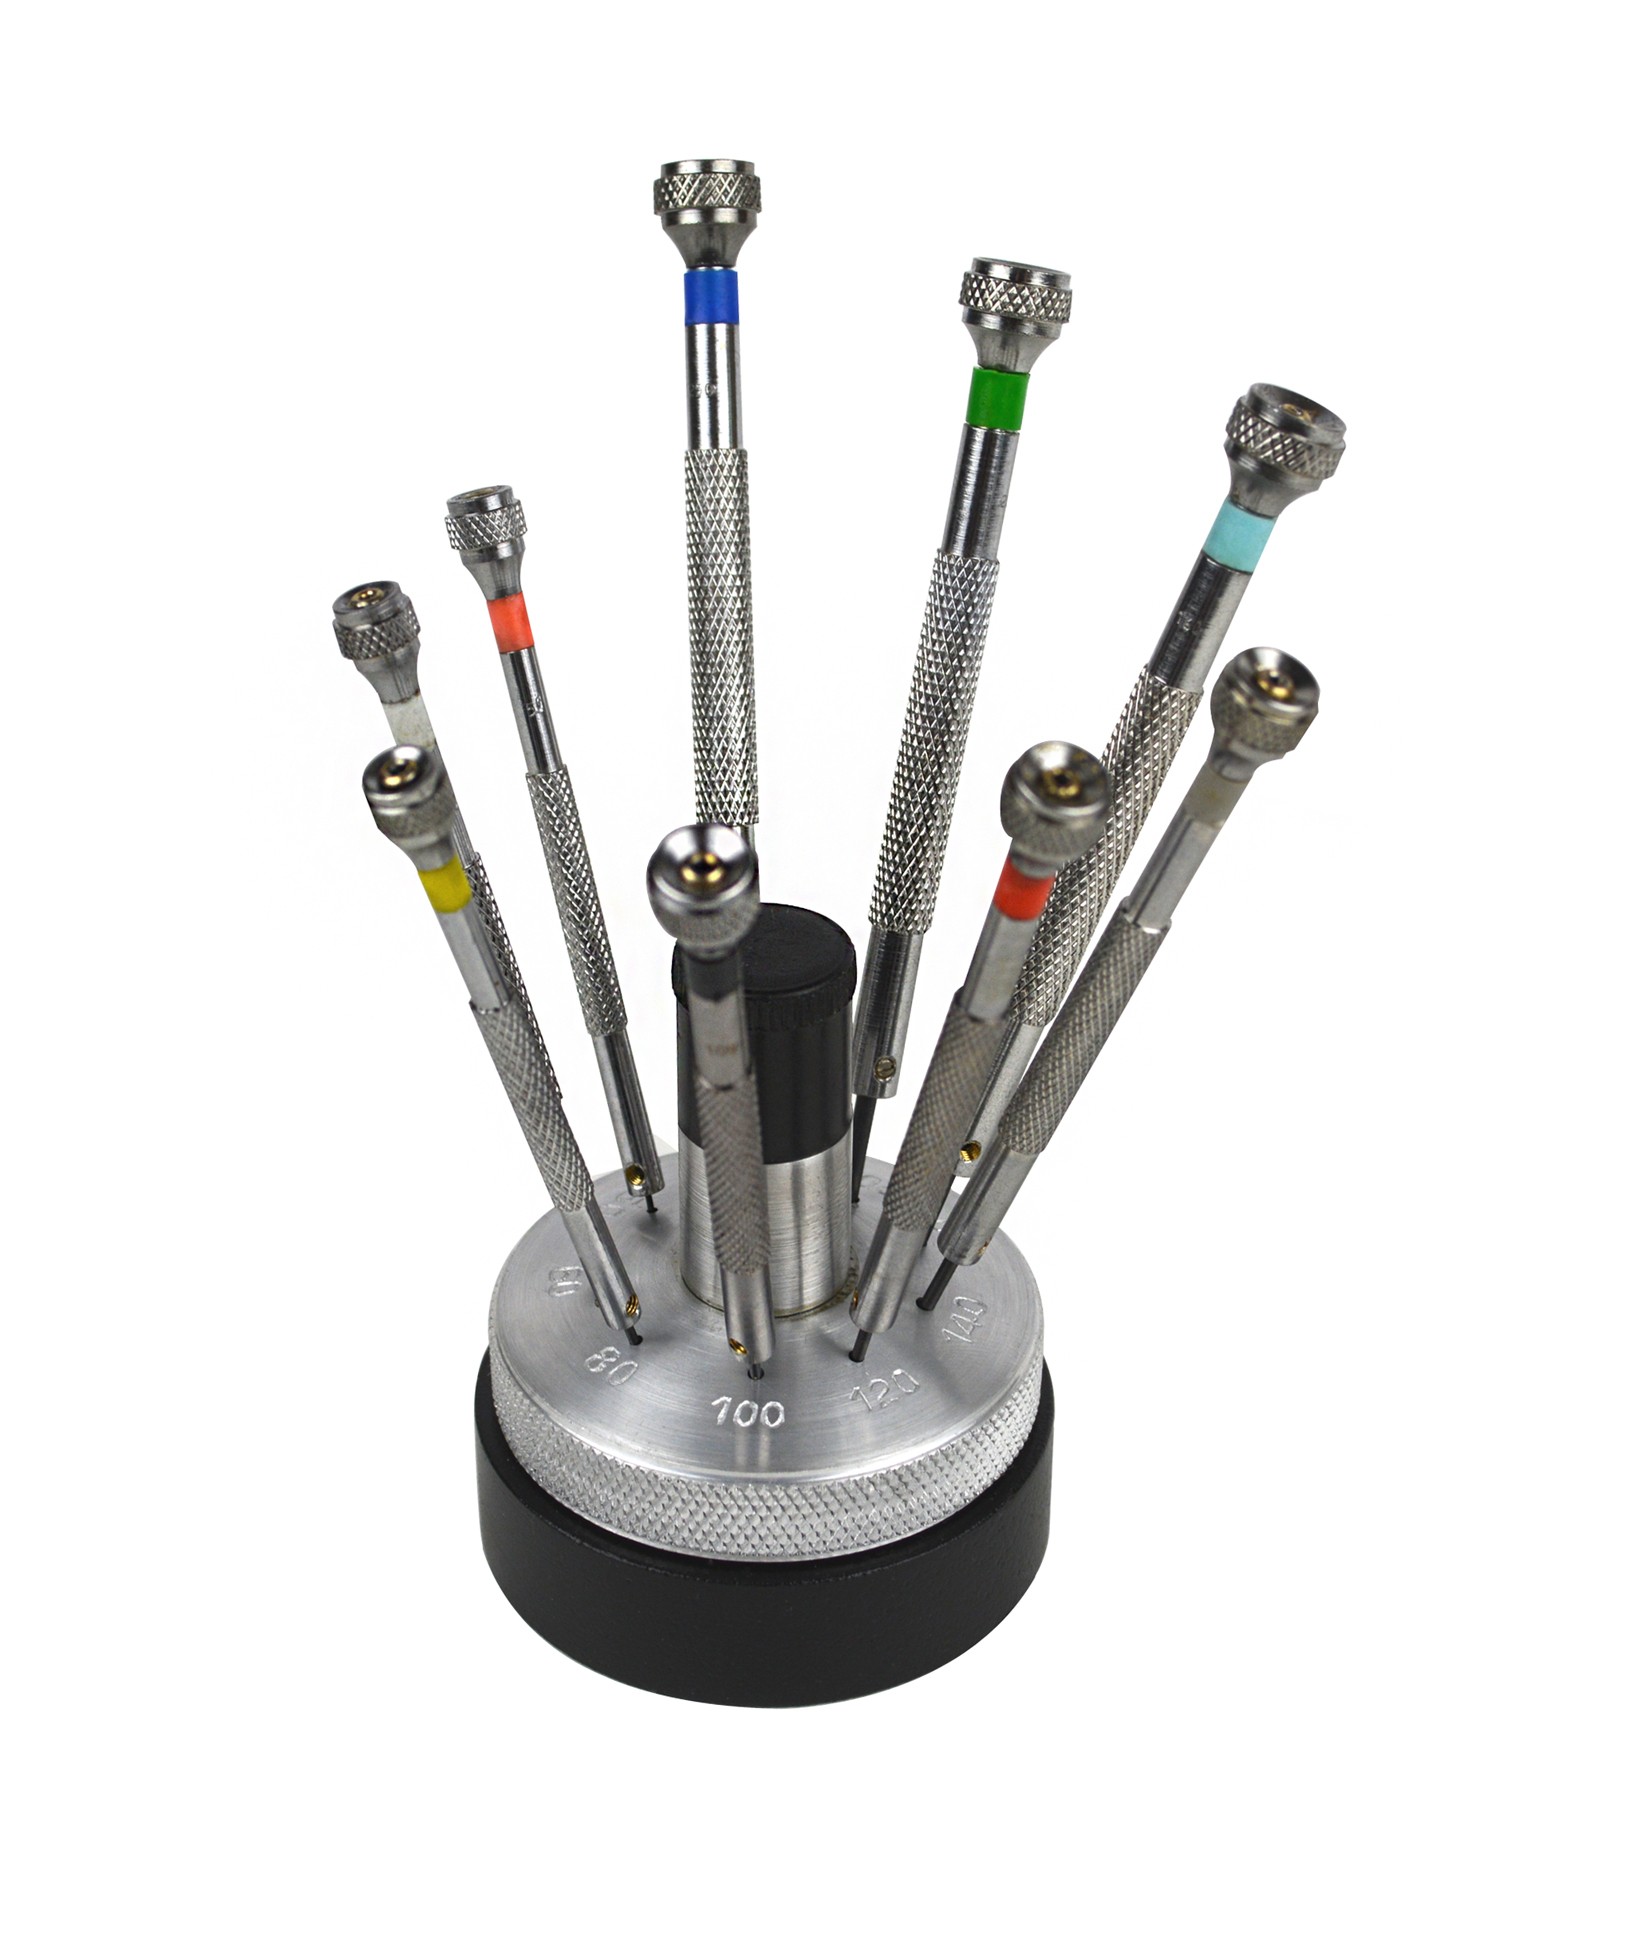 Set of 9 Screwdrivers w/ Revolving Stand & Spare Blades